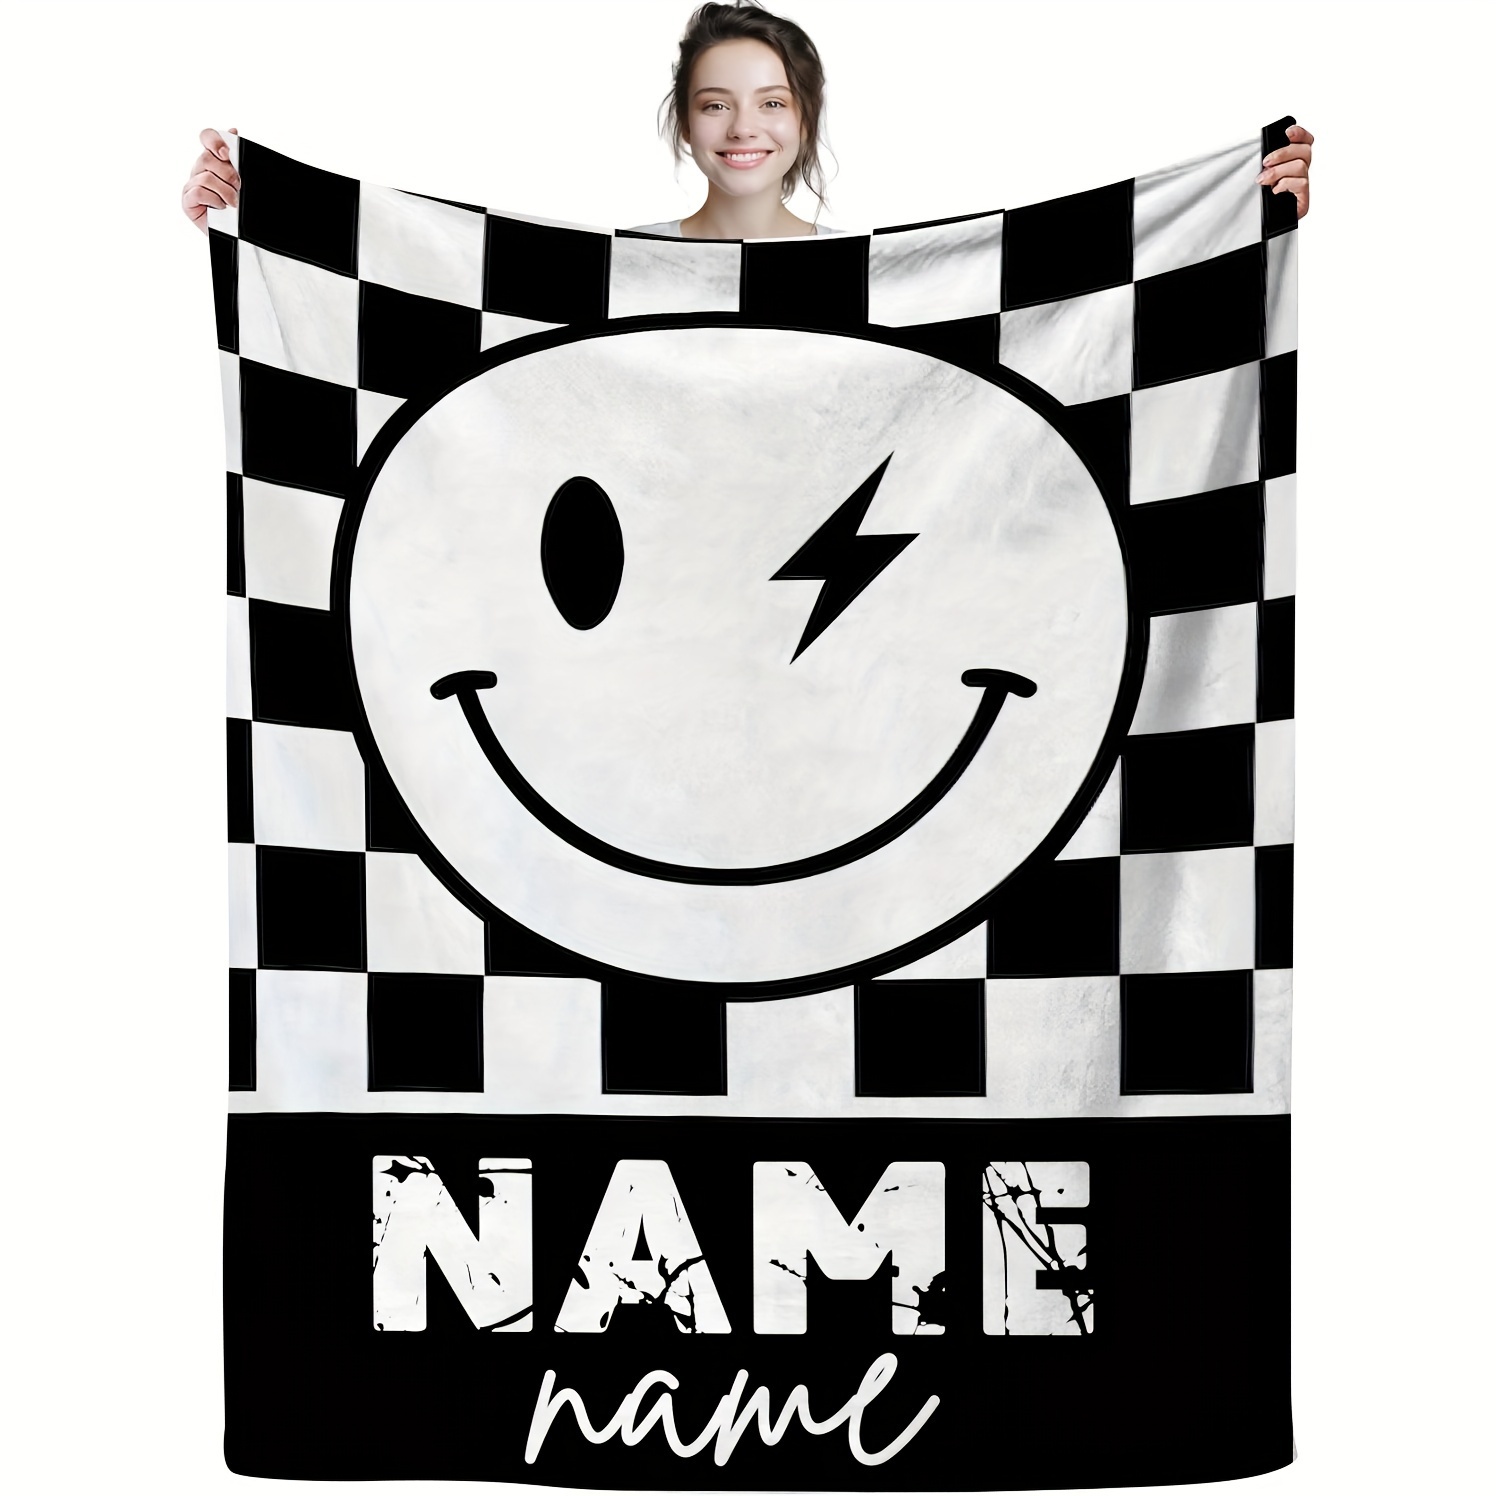 

Personalized Smile Blanket - Soft Flannel Throw With Custom Name, Perfect Gift For Best Friends & Family, All-season Cozy Nap Blanket